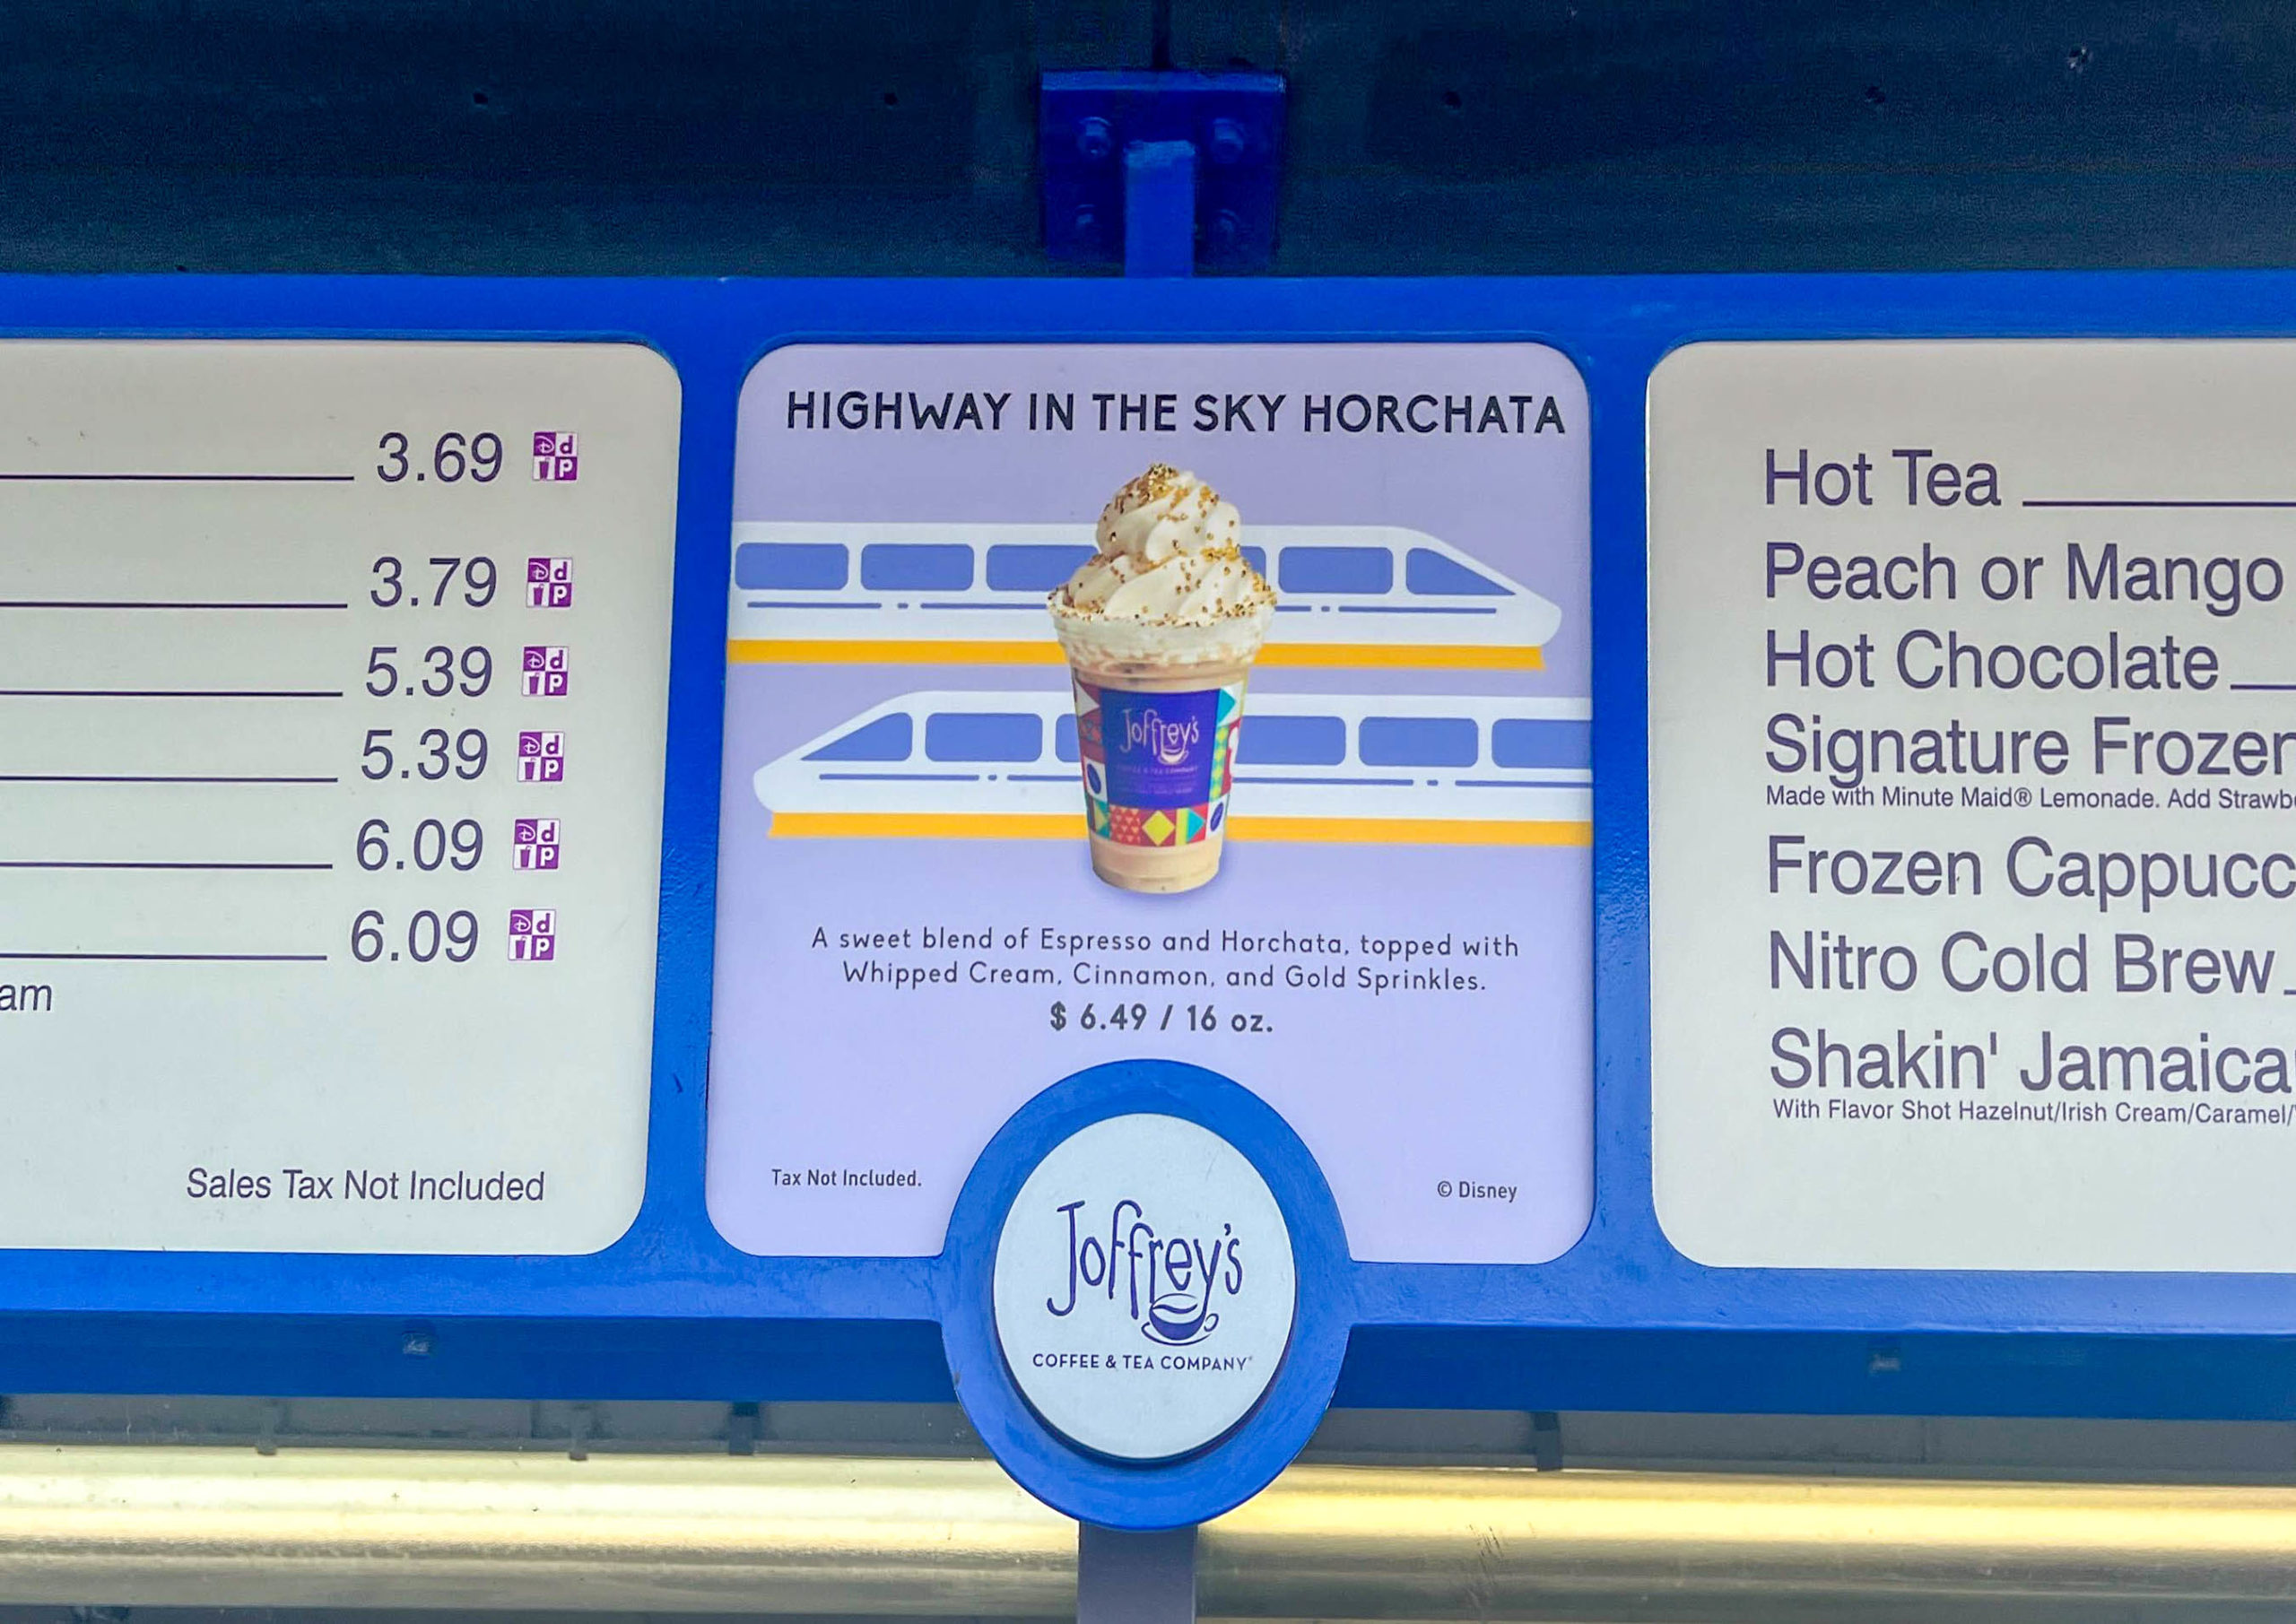 Highway in the Sky Horchata